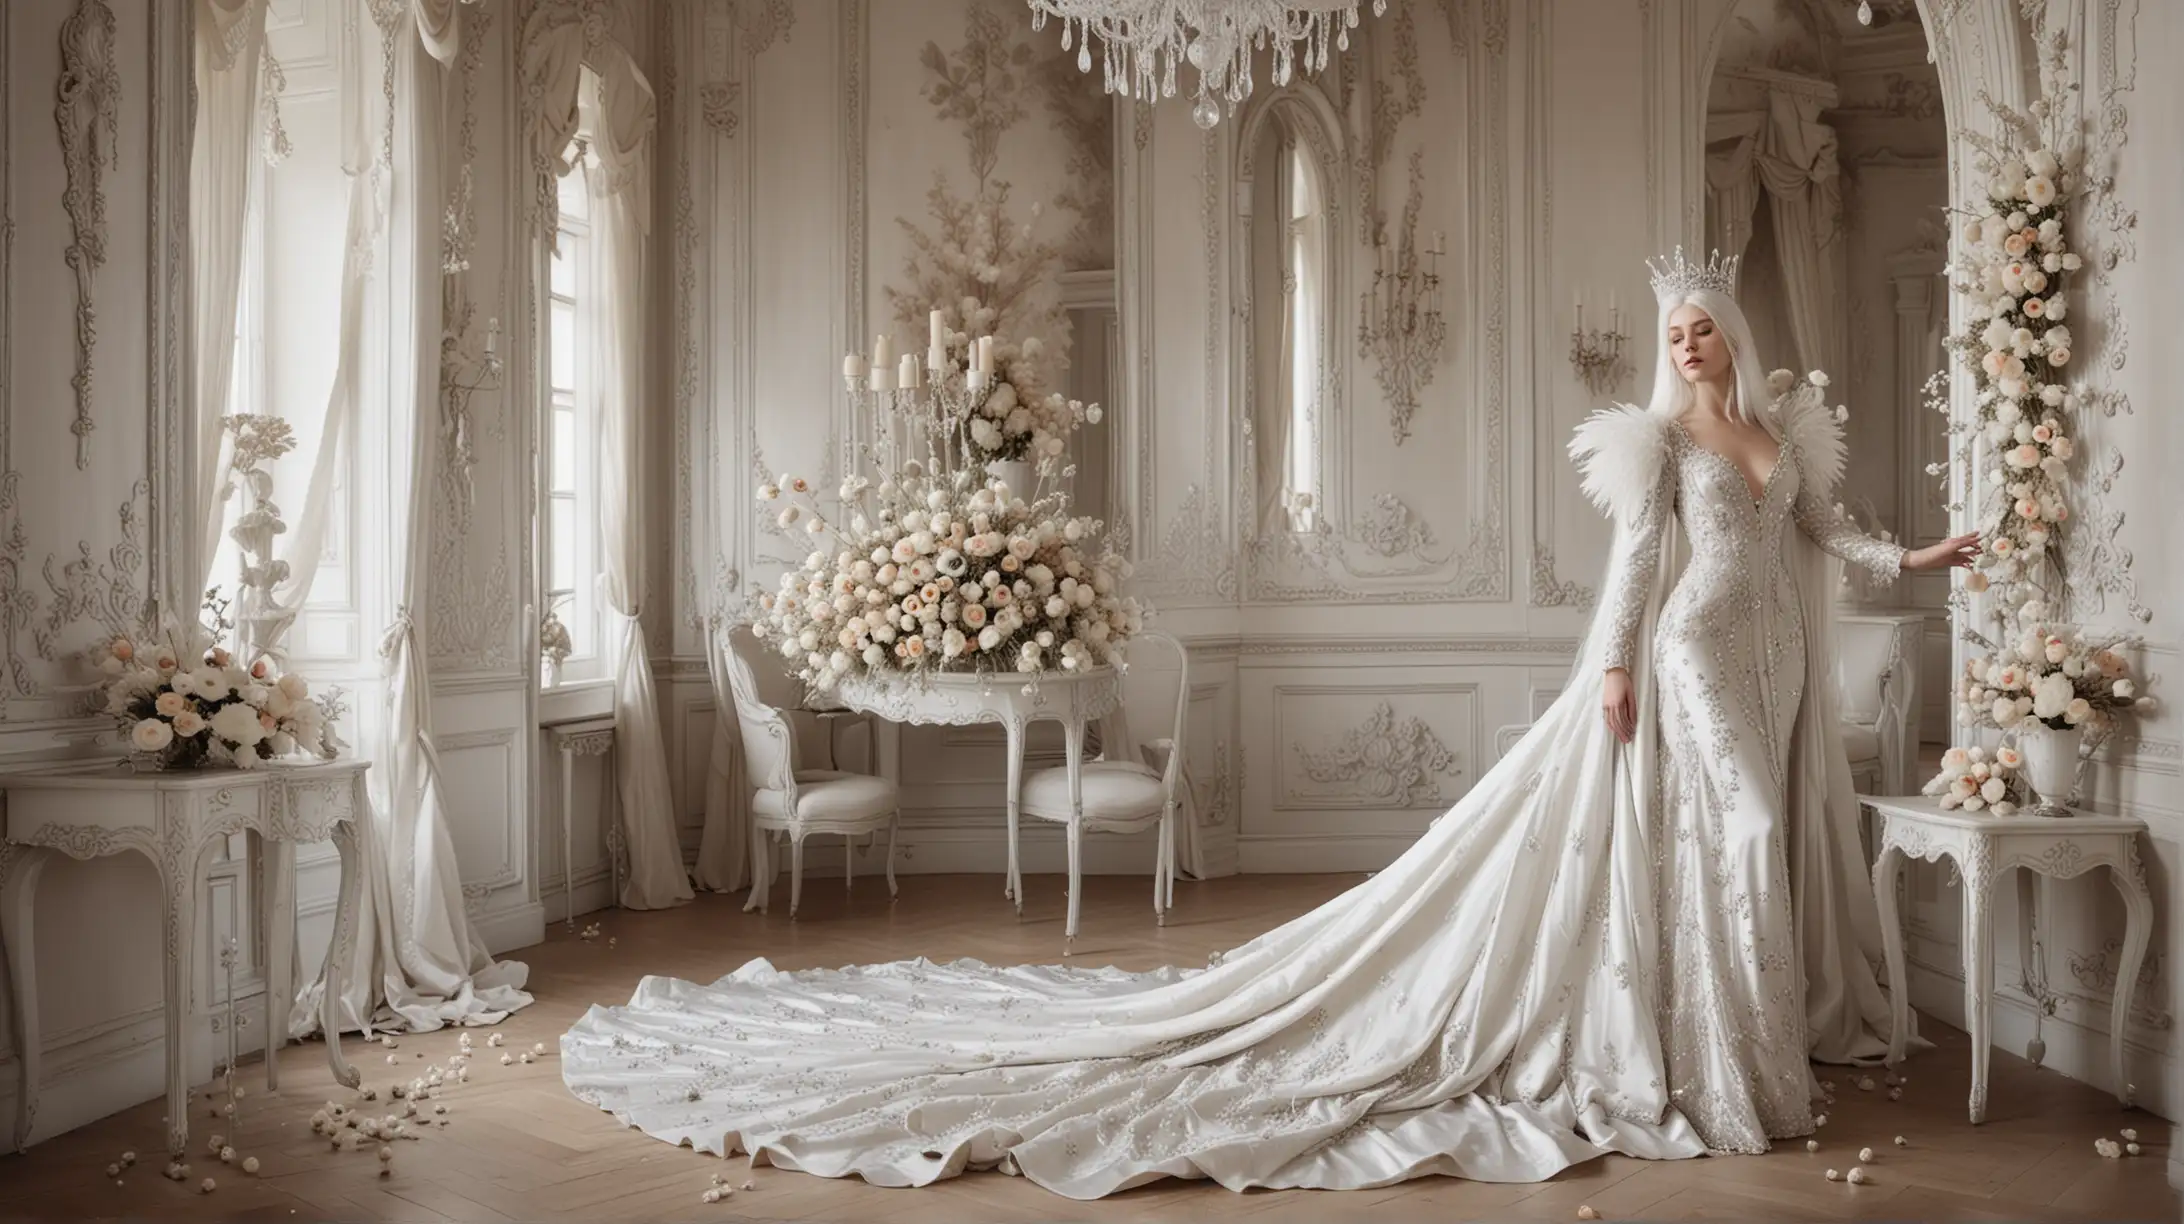 fantastic surreal image all completely in pearl-white colour, female with long straight white hair, topped with a crown of long silver spikes, wearing haute couture silk gown with short puffy sleeves, next to her is a white peacock with all it’s feathers spread open, she is in the corner of a white rococo inspired room, decorated with wall paper of long poppy flowers